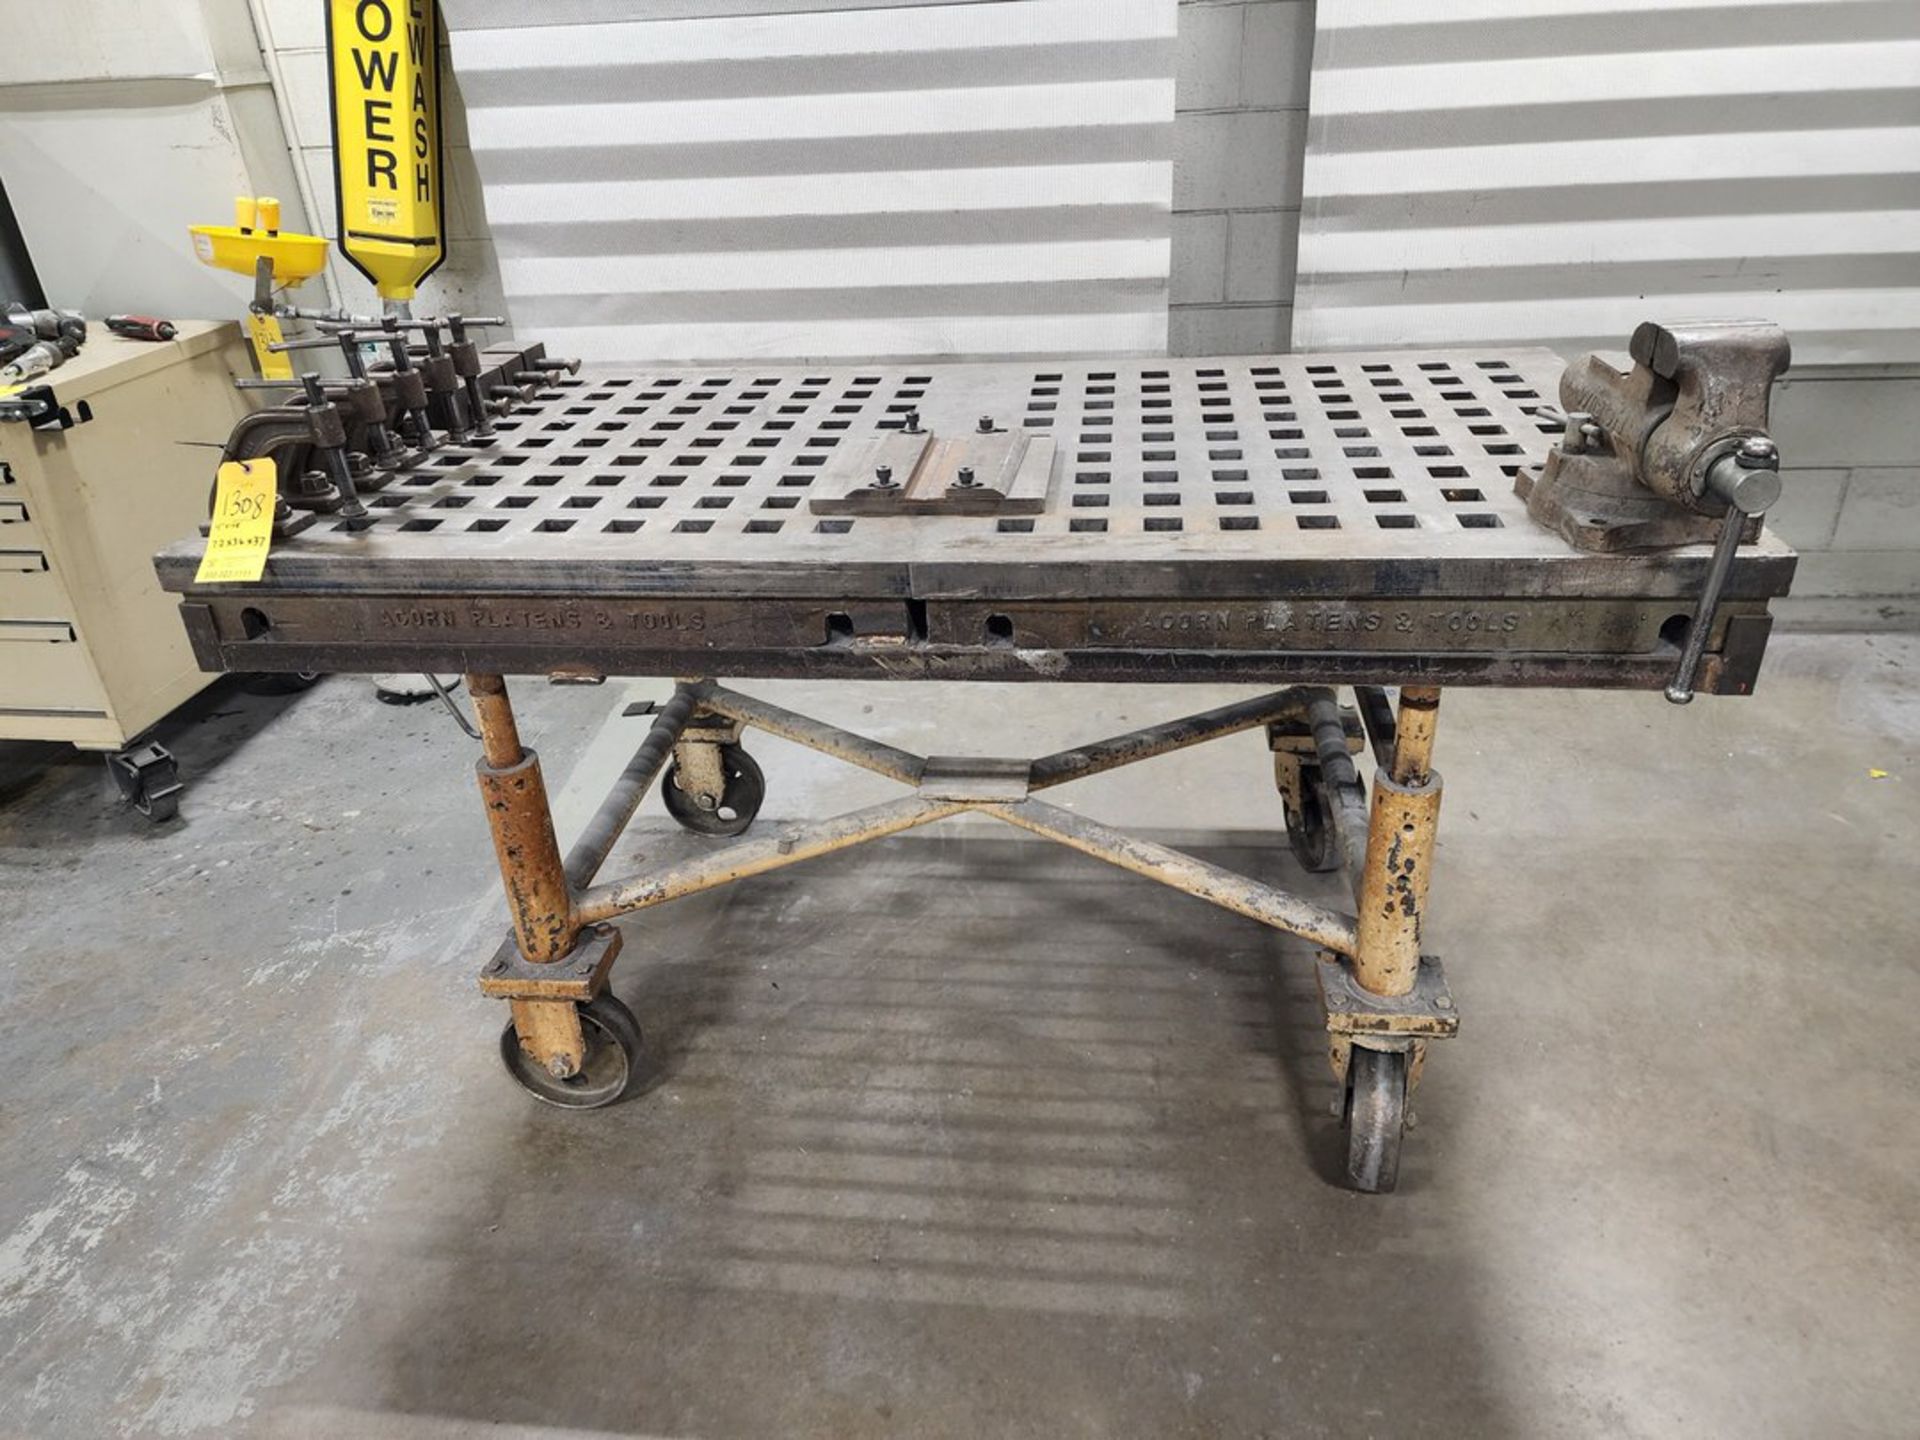 Welding Table 72" x 36" x 37"H; W/ 4" Wilton Vise & Assorted Clamps